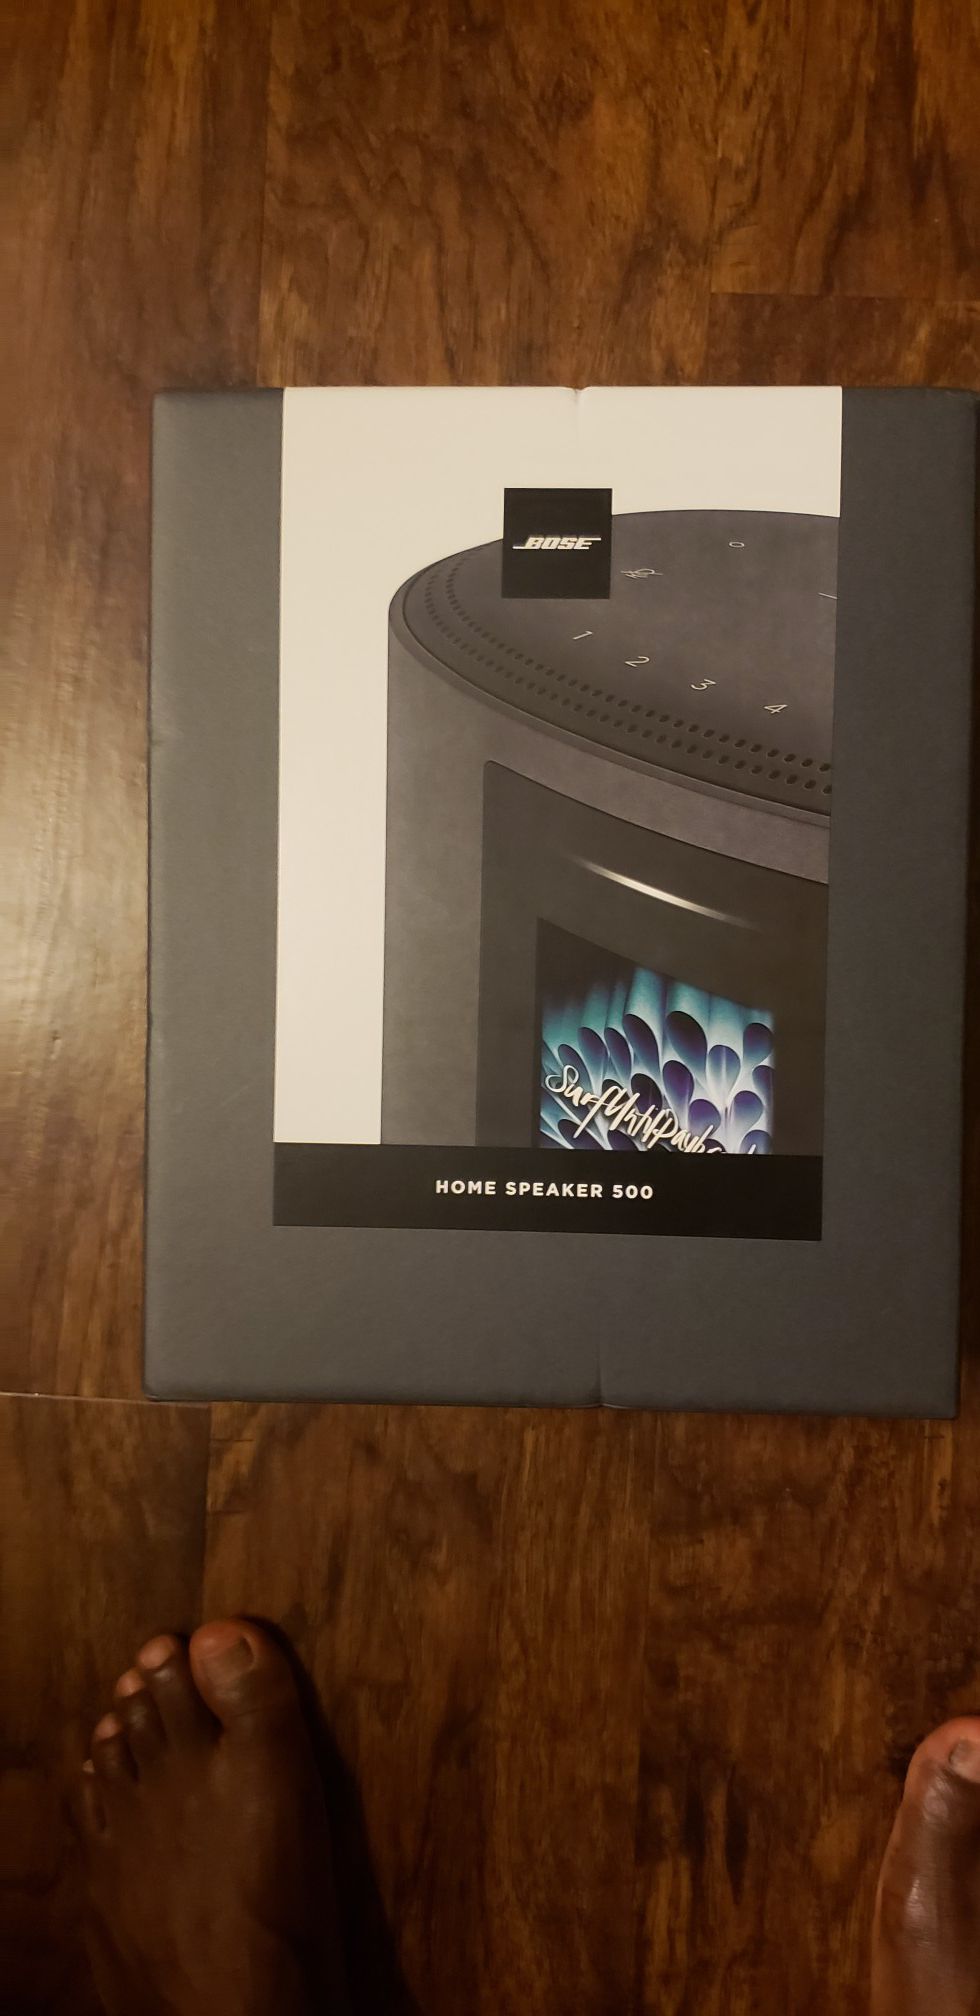 BOSE HOME SPEAKER 500 BLACK BRAND NEW SEALED IN BOX MY PRICE IS FIRM THANK YOU.